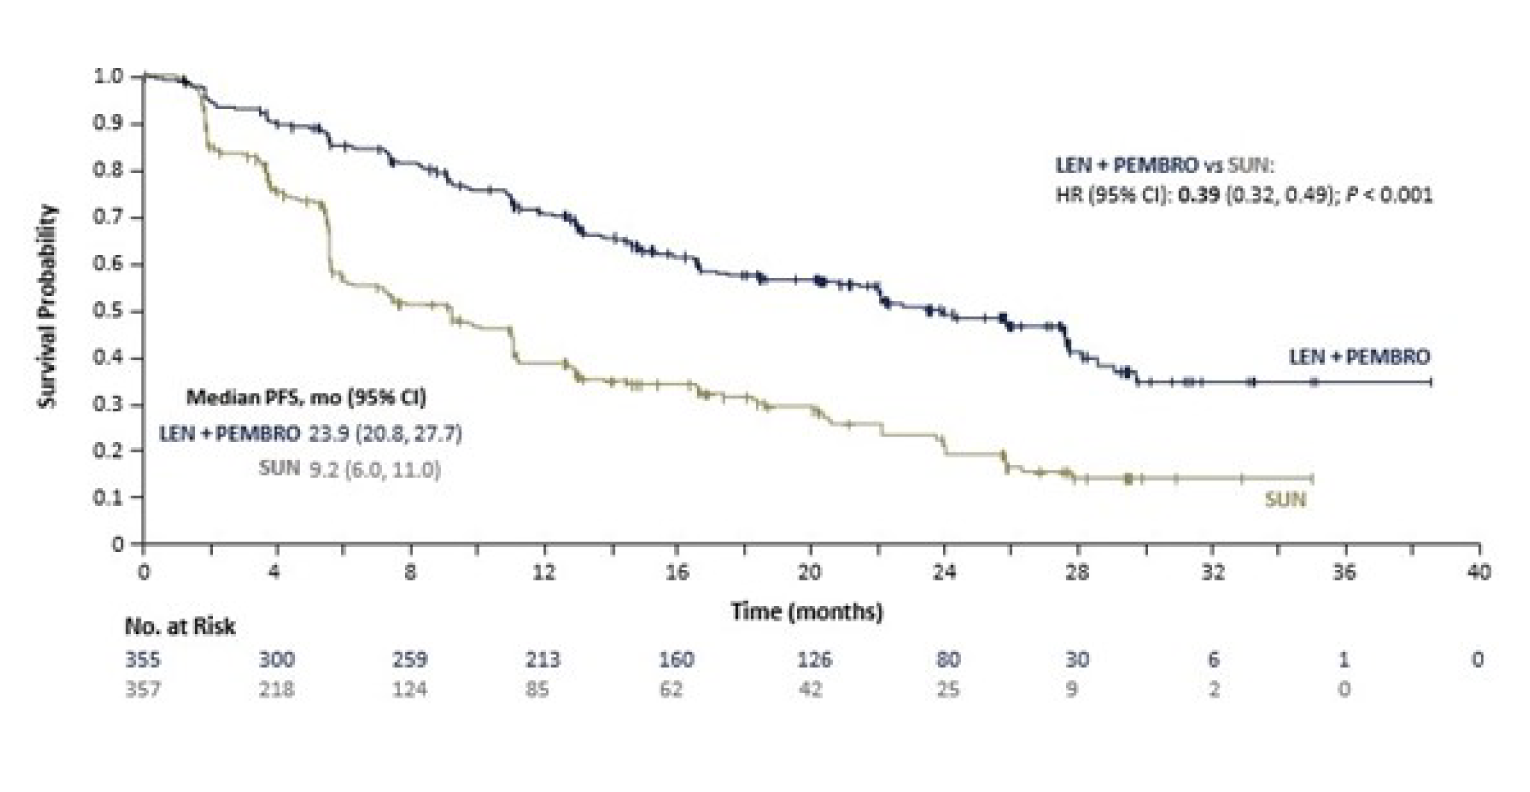 Graph of the Kaplan-Meier analysis of PFS for patients enrolled in the CLEAR trial, the number of at-risk patients treated receiving LEN-PEM at 0, 4, 8, 12, 16, 20, 24, 28, 32, 34, 36, and 40 months was 355, 300, 259, 213, 160, 126, 80, 30, 6, 3, 1, and 0, respectively. The number of at-risk patients receiving SUN at 0, 4, 8, 12, 16, 20, 24, 28, 32, 34, and 36 months was 357, 218, 124, 85, 62, 42, 25, 9, 2, and 0, respectively. Separation of the Kaplan-Meier curves is maintained over time.